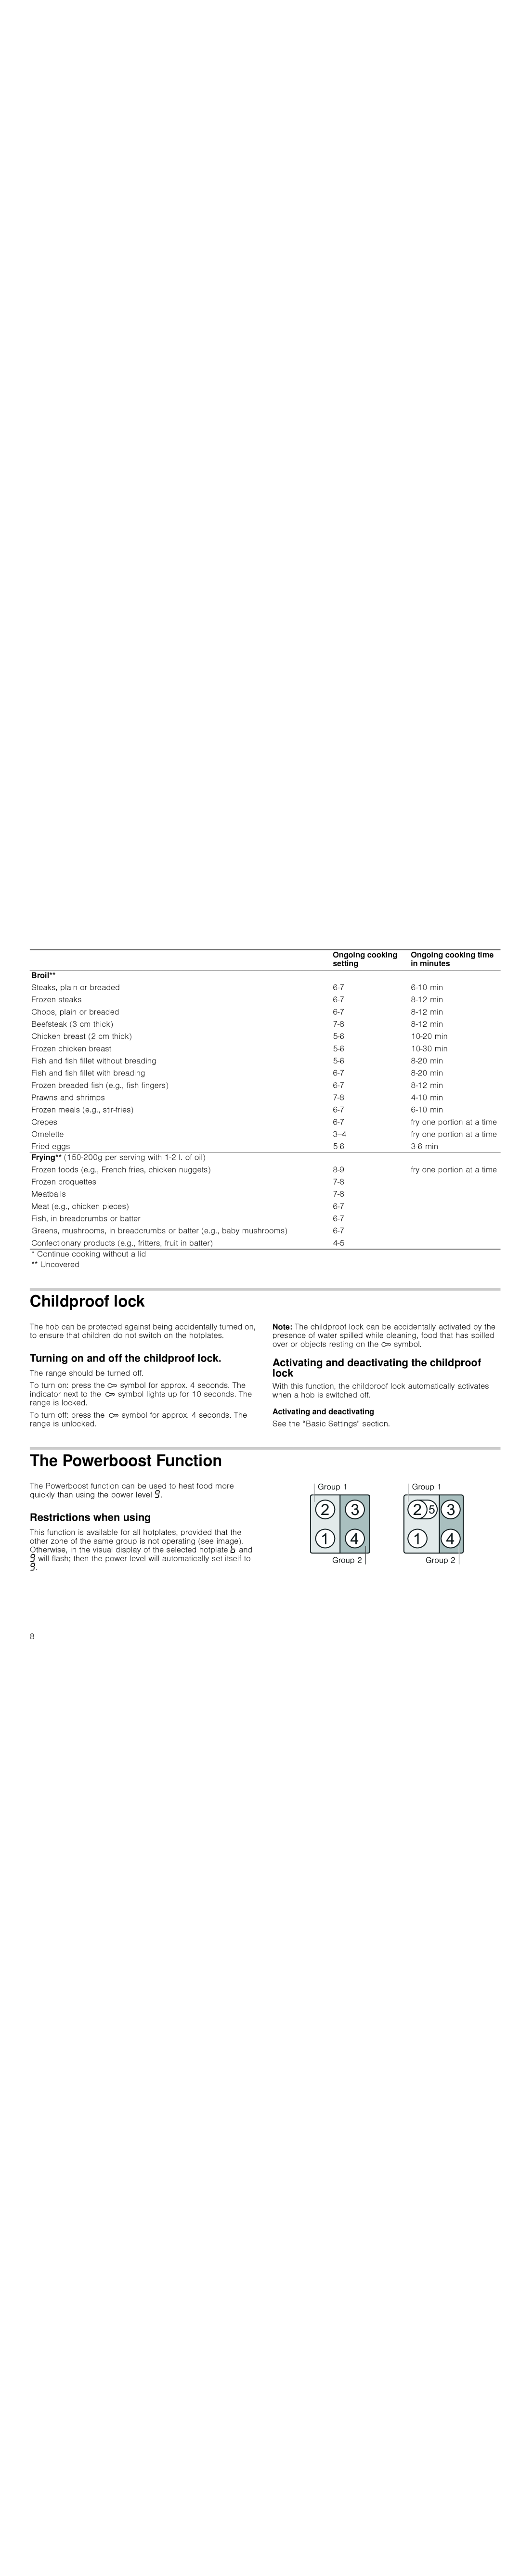 Bosch Appliances PIE645Q14E Childproof lock, The Powerboost Function, Turning on and off the childproof lock 